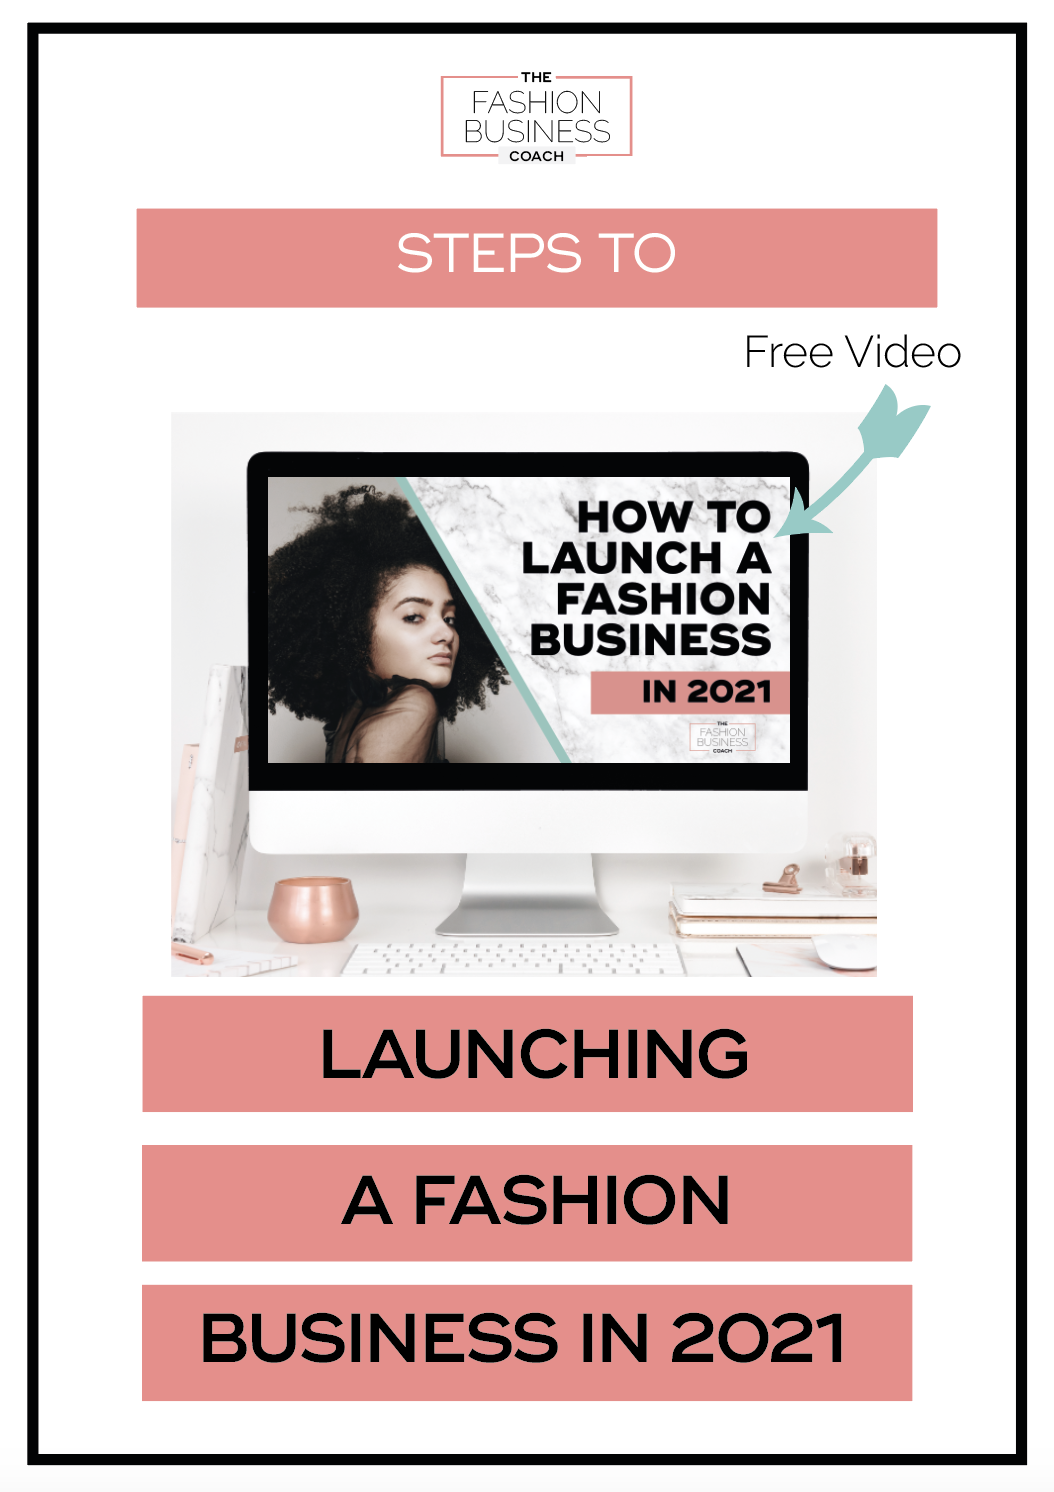 Steps to Launching Fashion Business in 2021 3.png